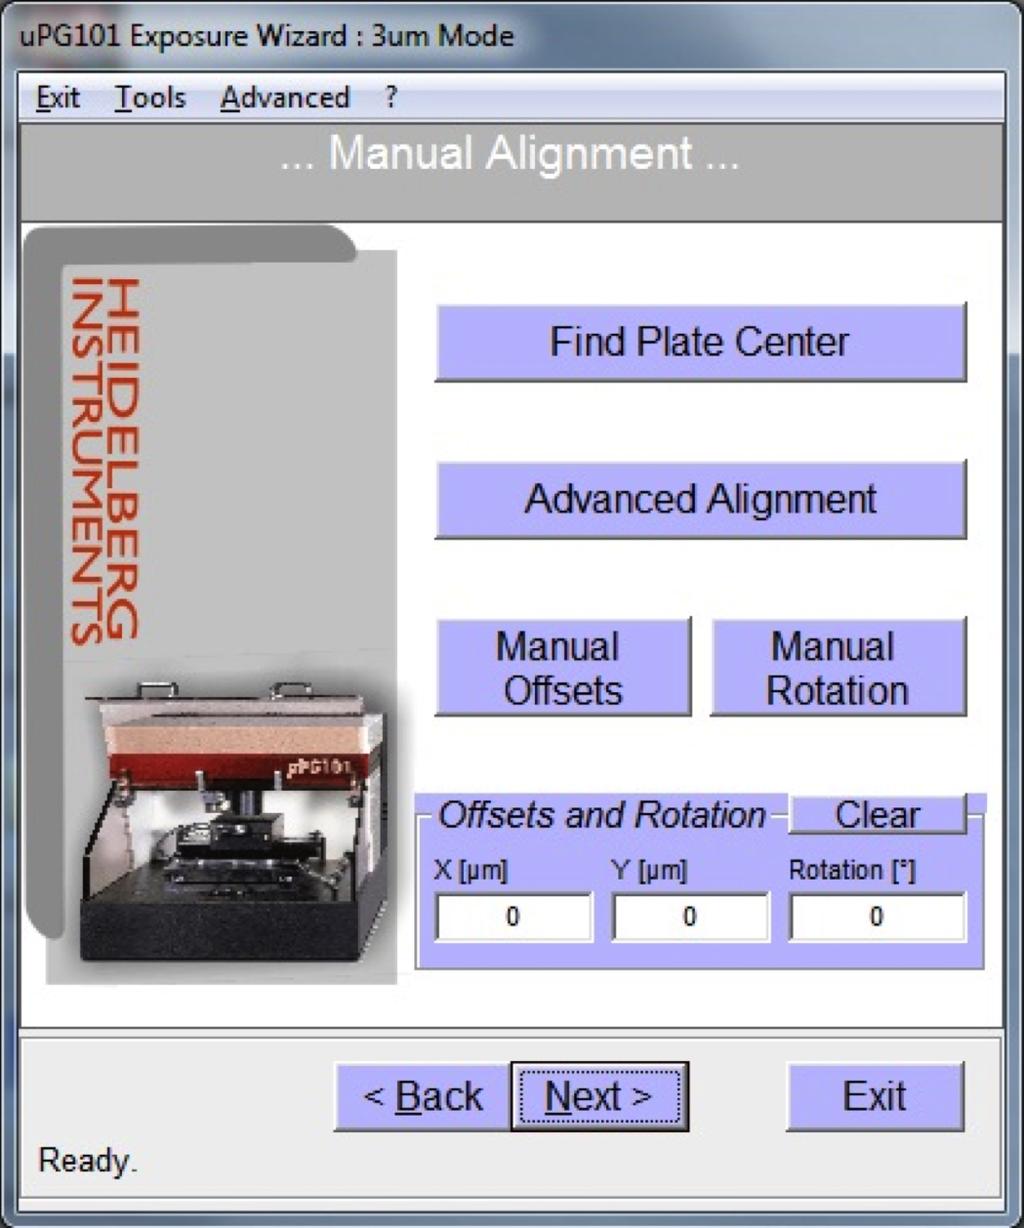 6 Manual Alignment 7.6.1 Default is no alignment design centered to stage center 7.6.2 Confirm Offsets are appropriate for design, see Figure 7, Manual Alignment 7.